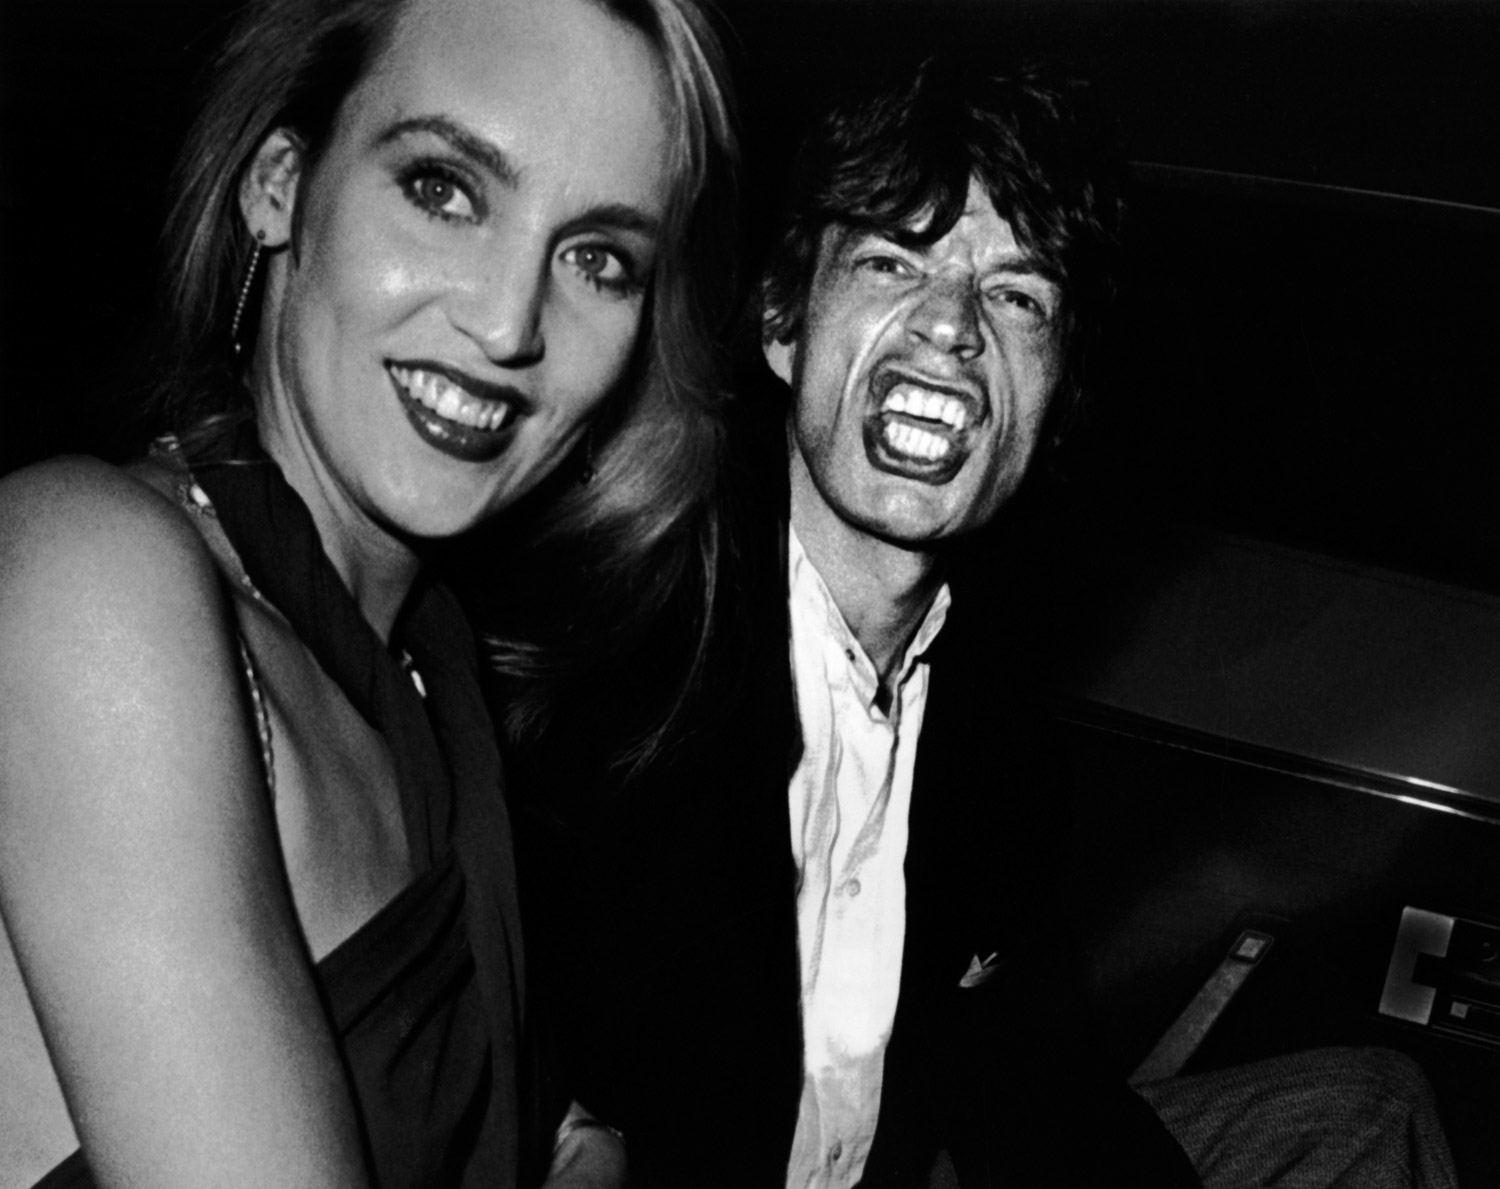 Mick Jagger with his girlfriend Jerry Hall photographed as they left the Limelight club. Sept. 19, 1984